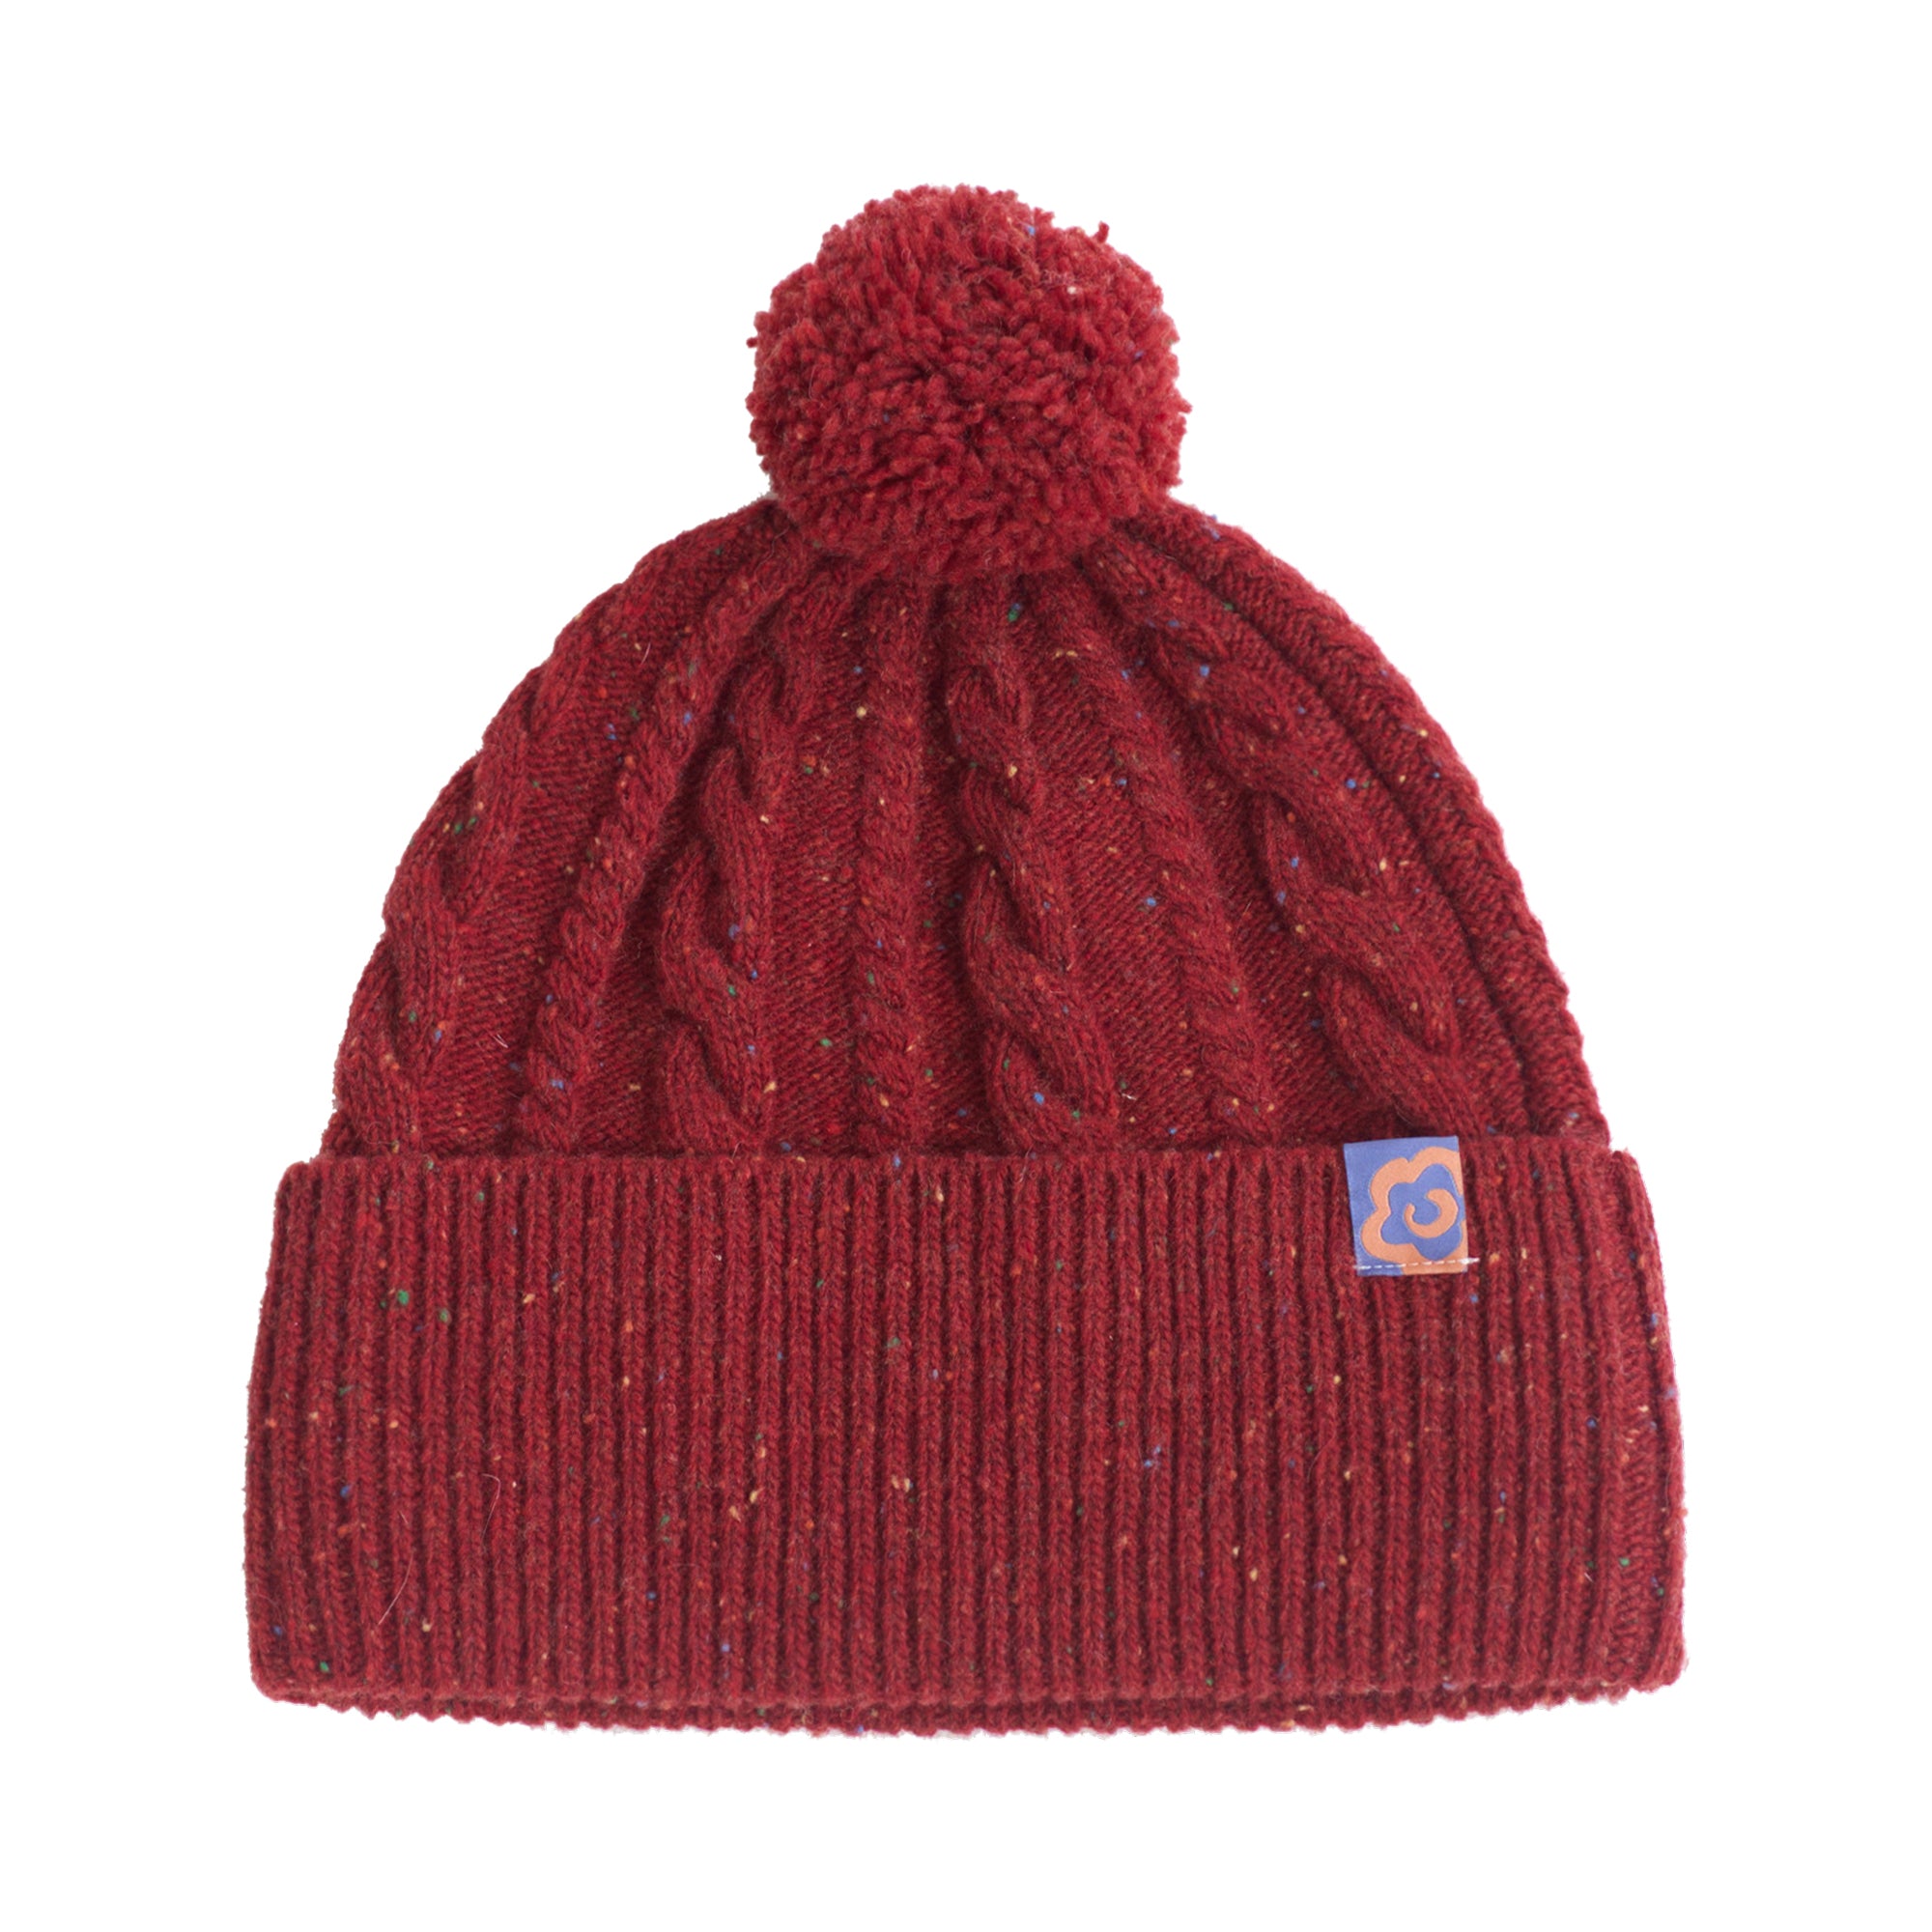 "Pom Pom" Cable Knit Wool Beanie Hat - Wine Red product